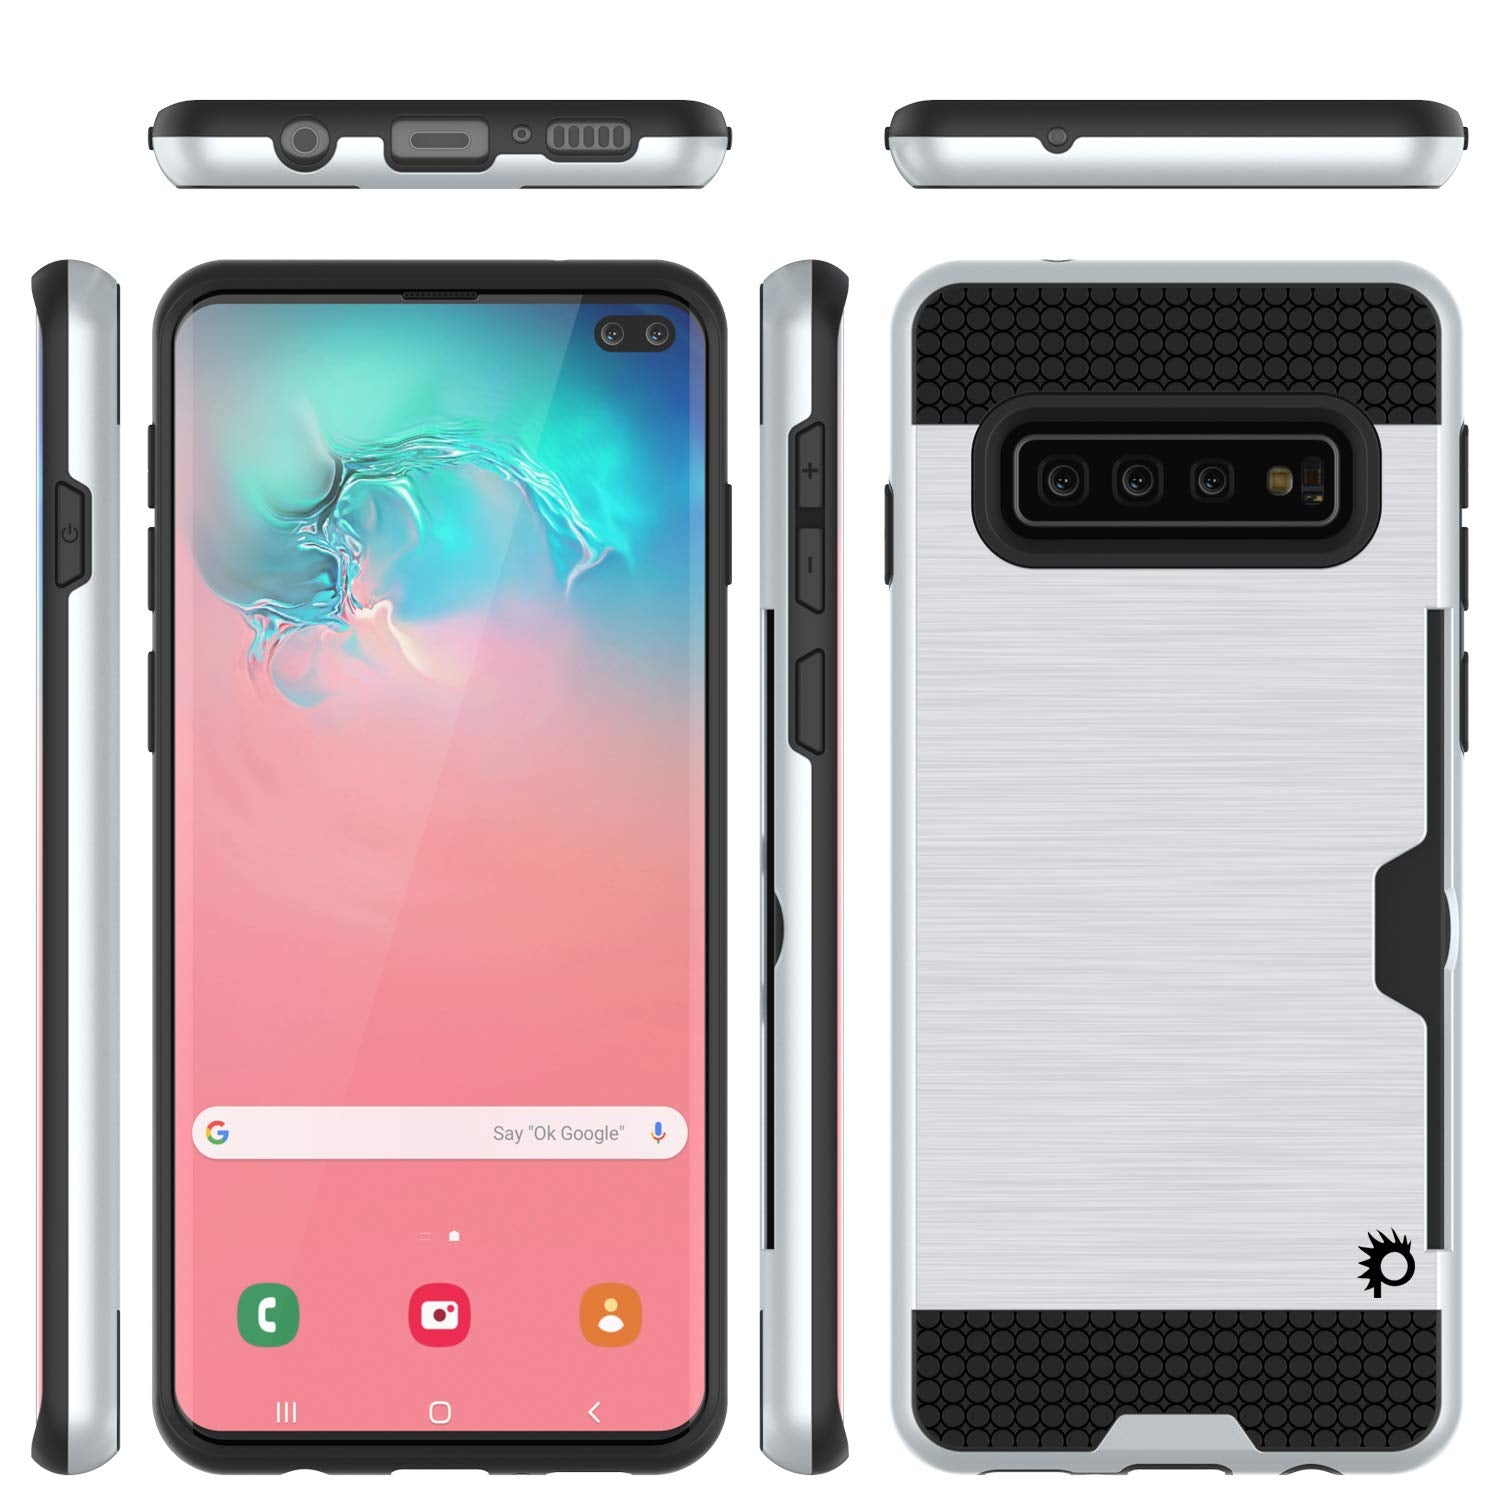 Galaxy S10+ Plus  Case, PUNKcase [SLOT Series] [Slim Fit] Dual-Layer Armor Cover w/Integrated Anti-Shock System, Credit Card Slot & Screen Protector [White]